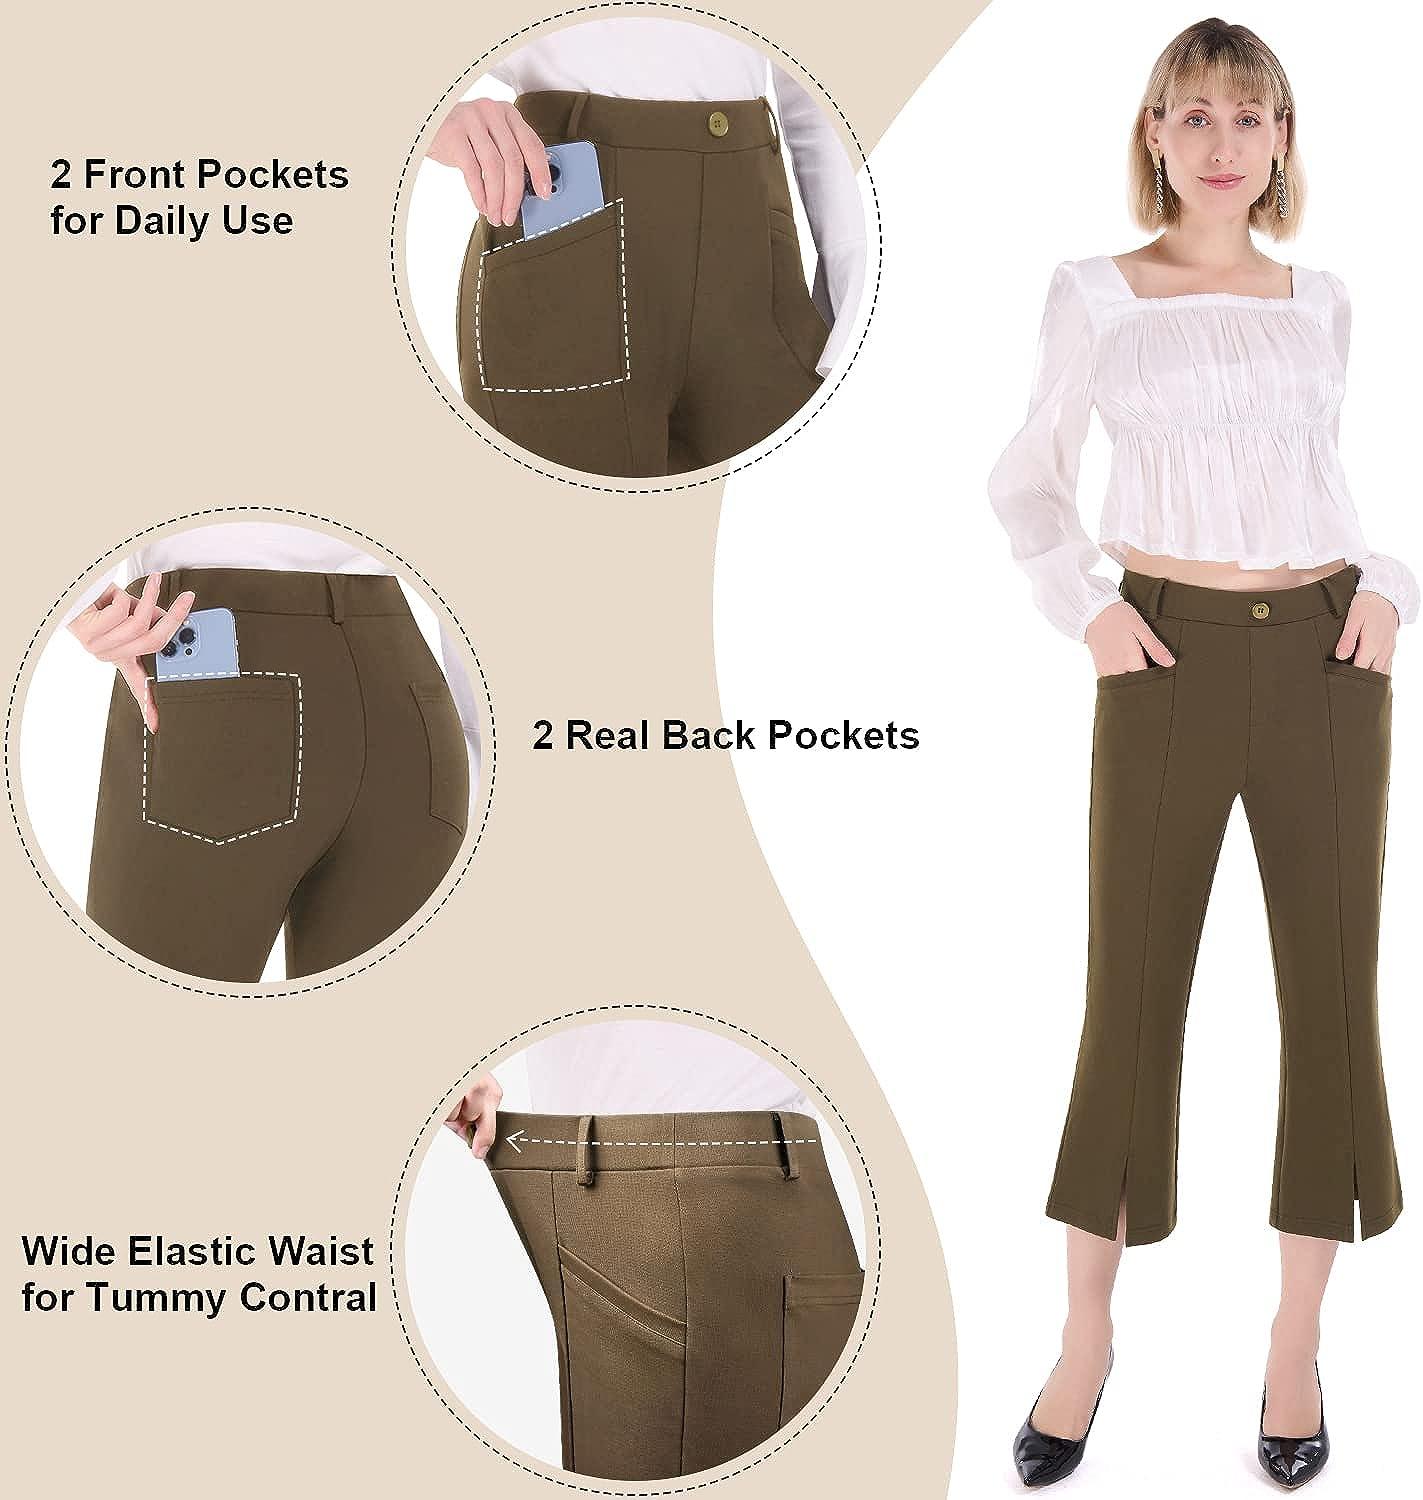 PUWEER Capri Pants for Women Dressy Business Casual Stretchy Flare Women's  Dress Pants with Pockets Summer Crop Work Capri Brown Small